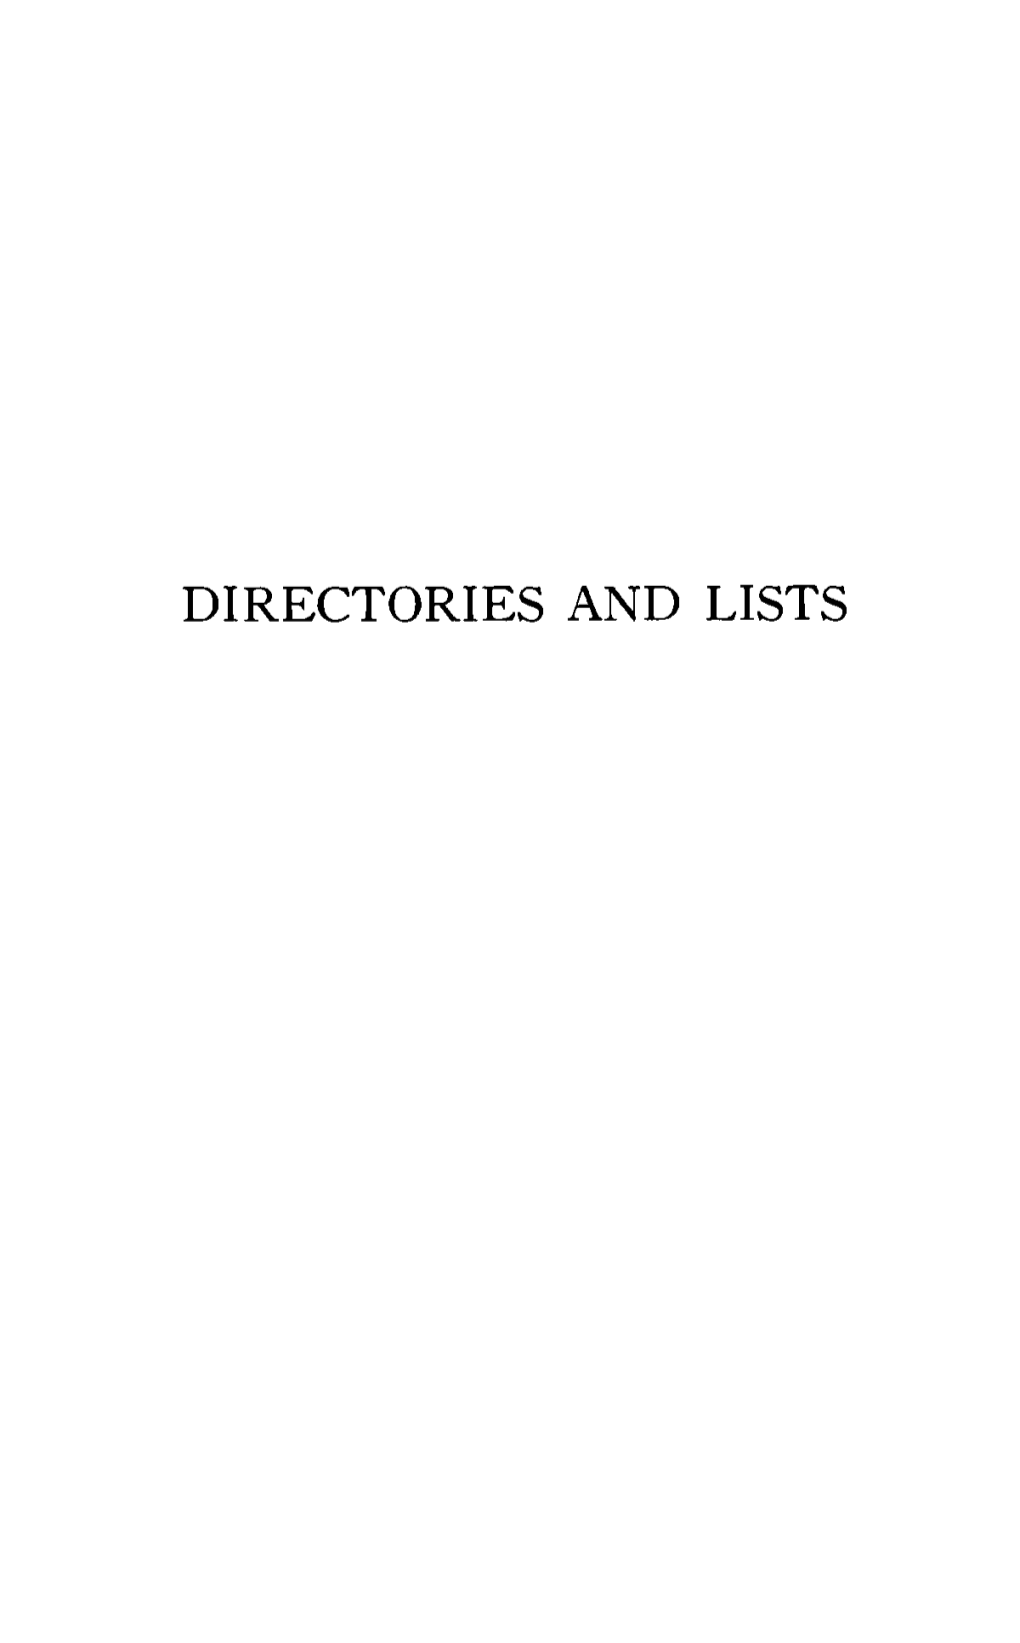 Directories and Lists Jewish National Organizations in the United States